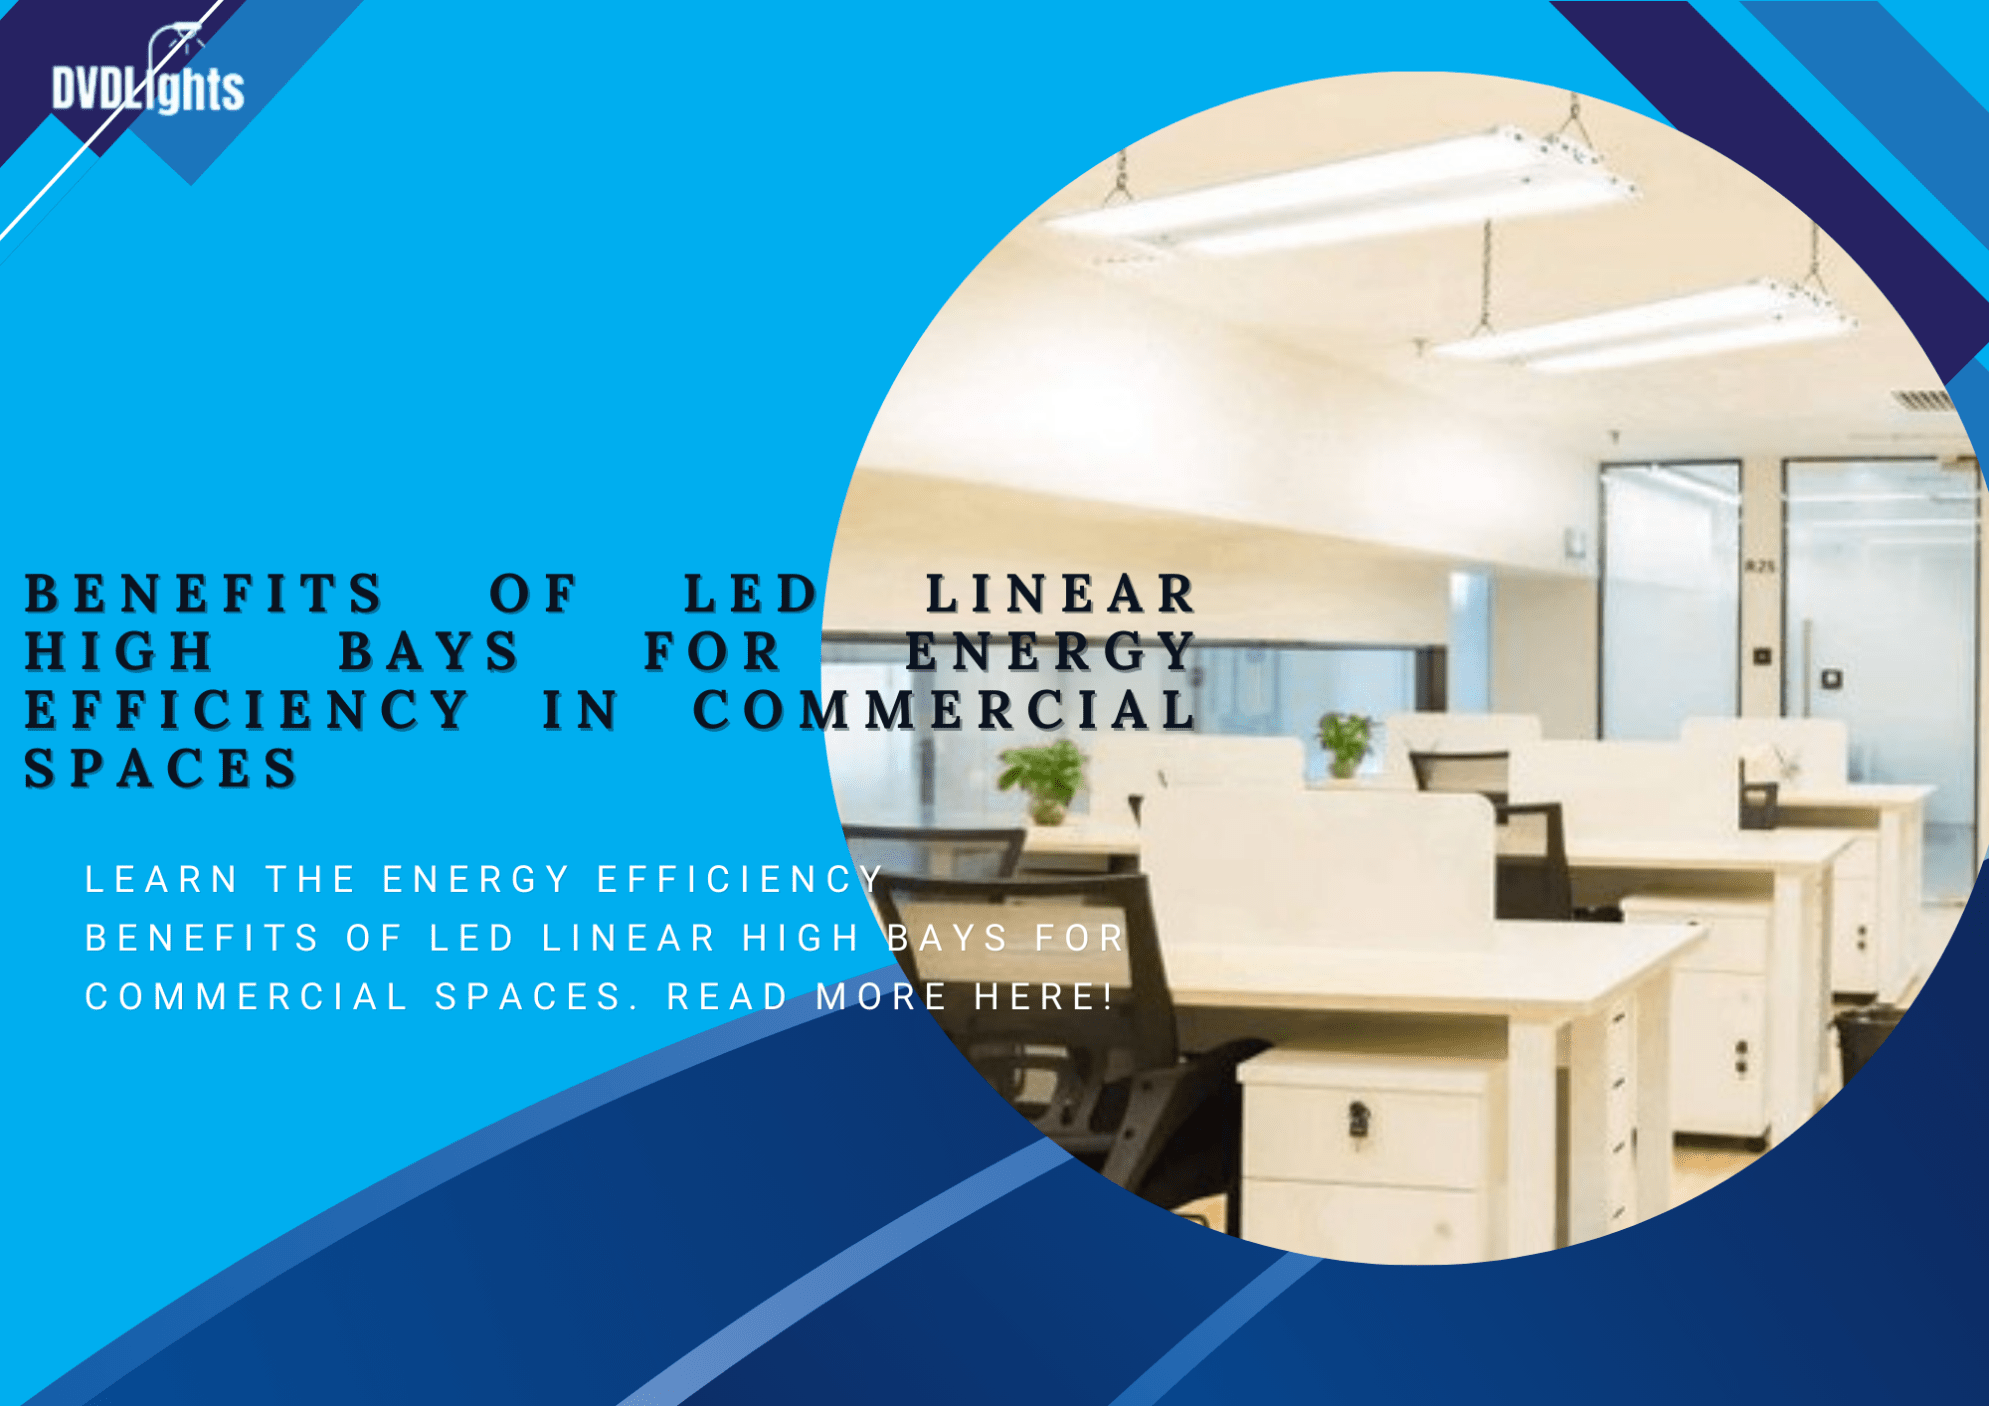 Benefits of Led linear high bays